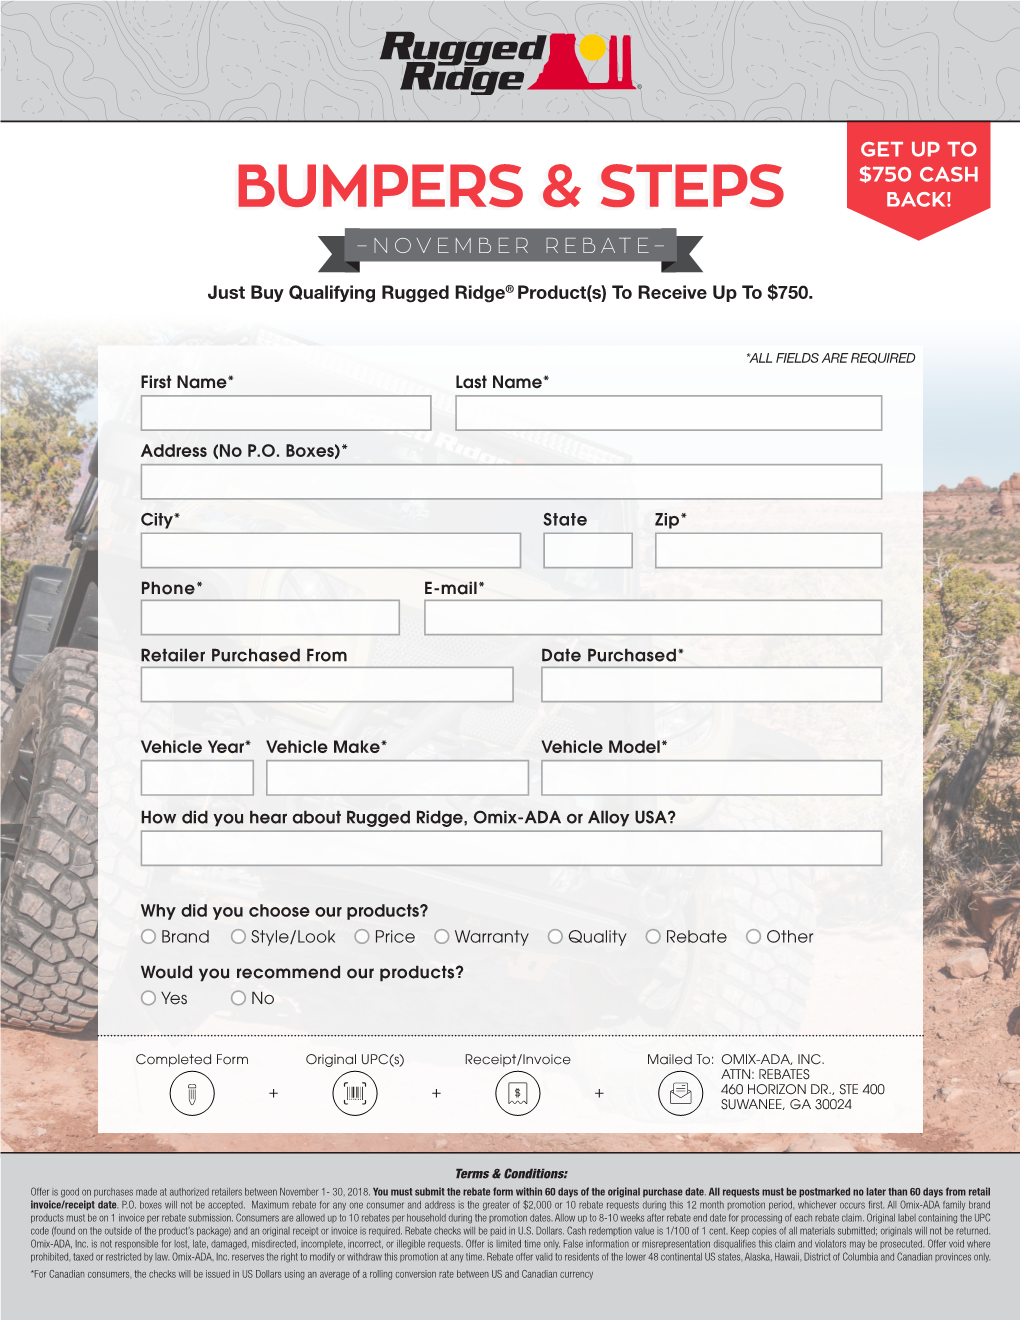 Bumpers & Steps